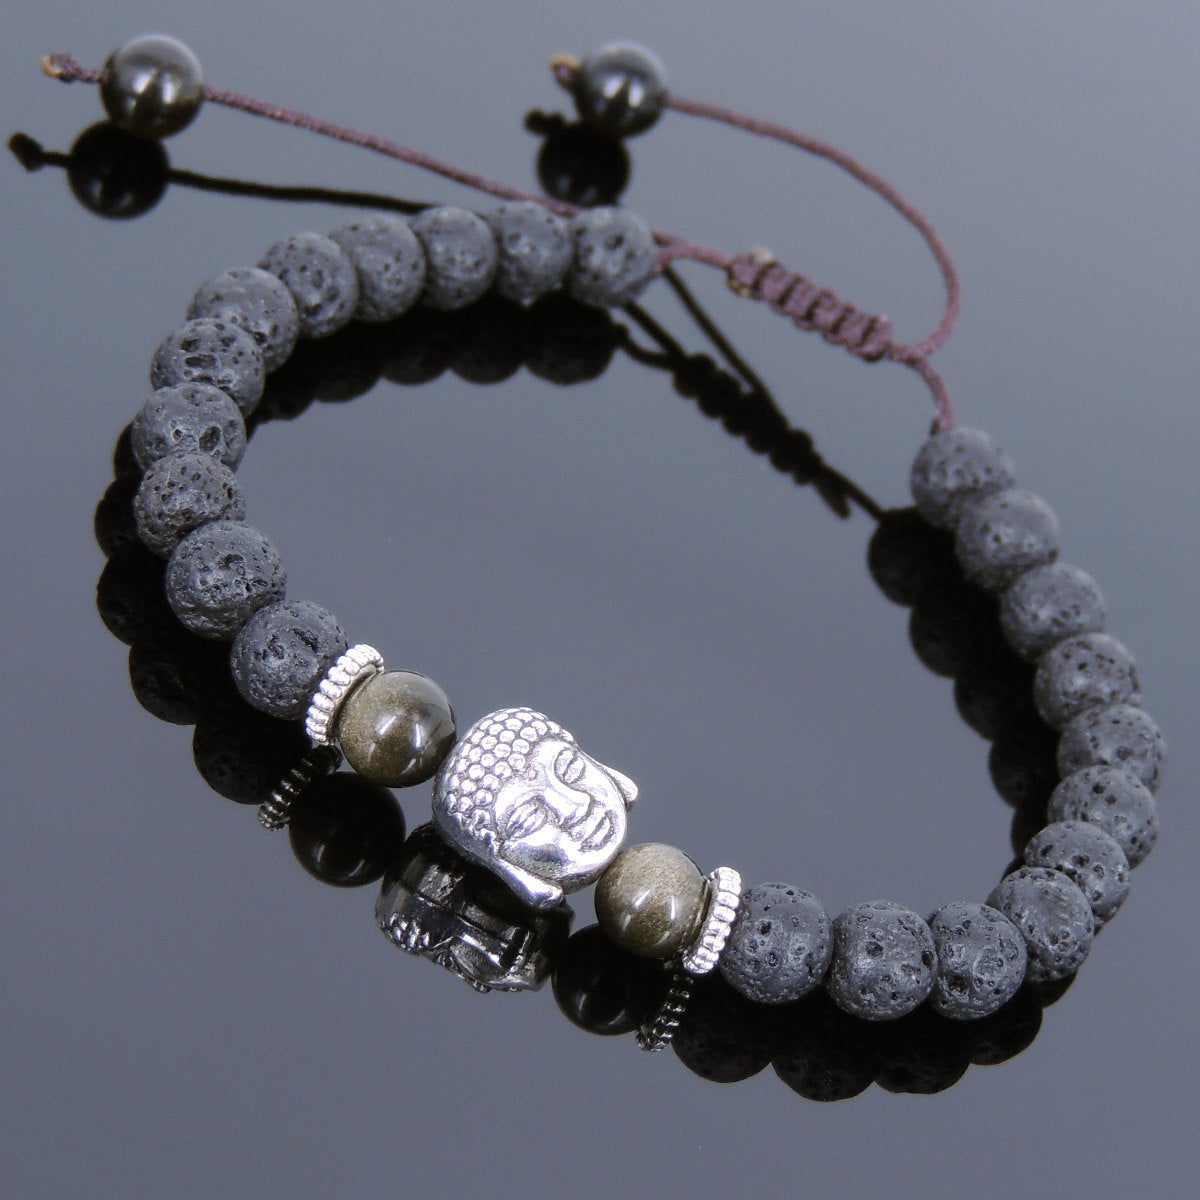 6mm Golden Obsidian & Lava Rock Adjustable Braided Stone Bracelet with Tibetan Silver Spacers & Guanyin Buddha Bead - Handmade by Gem & Silver TSB223